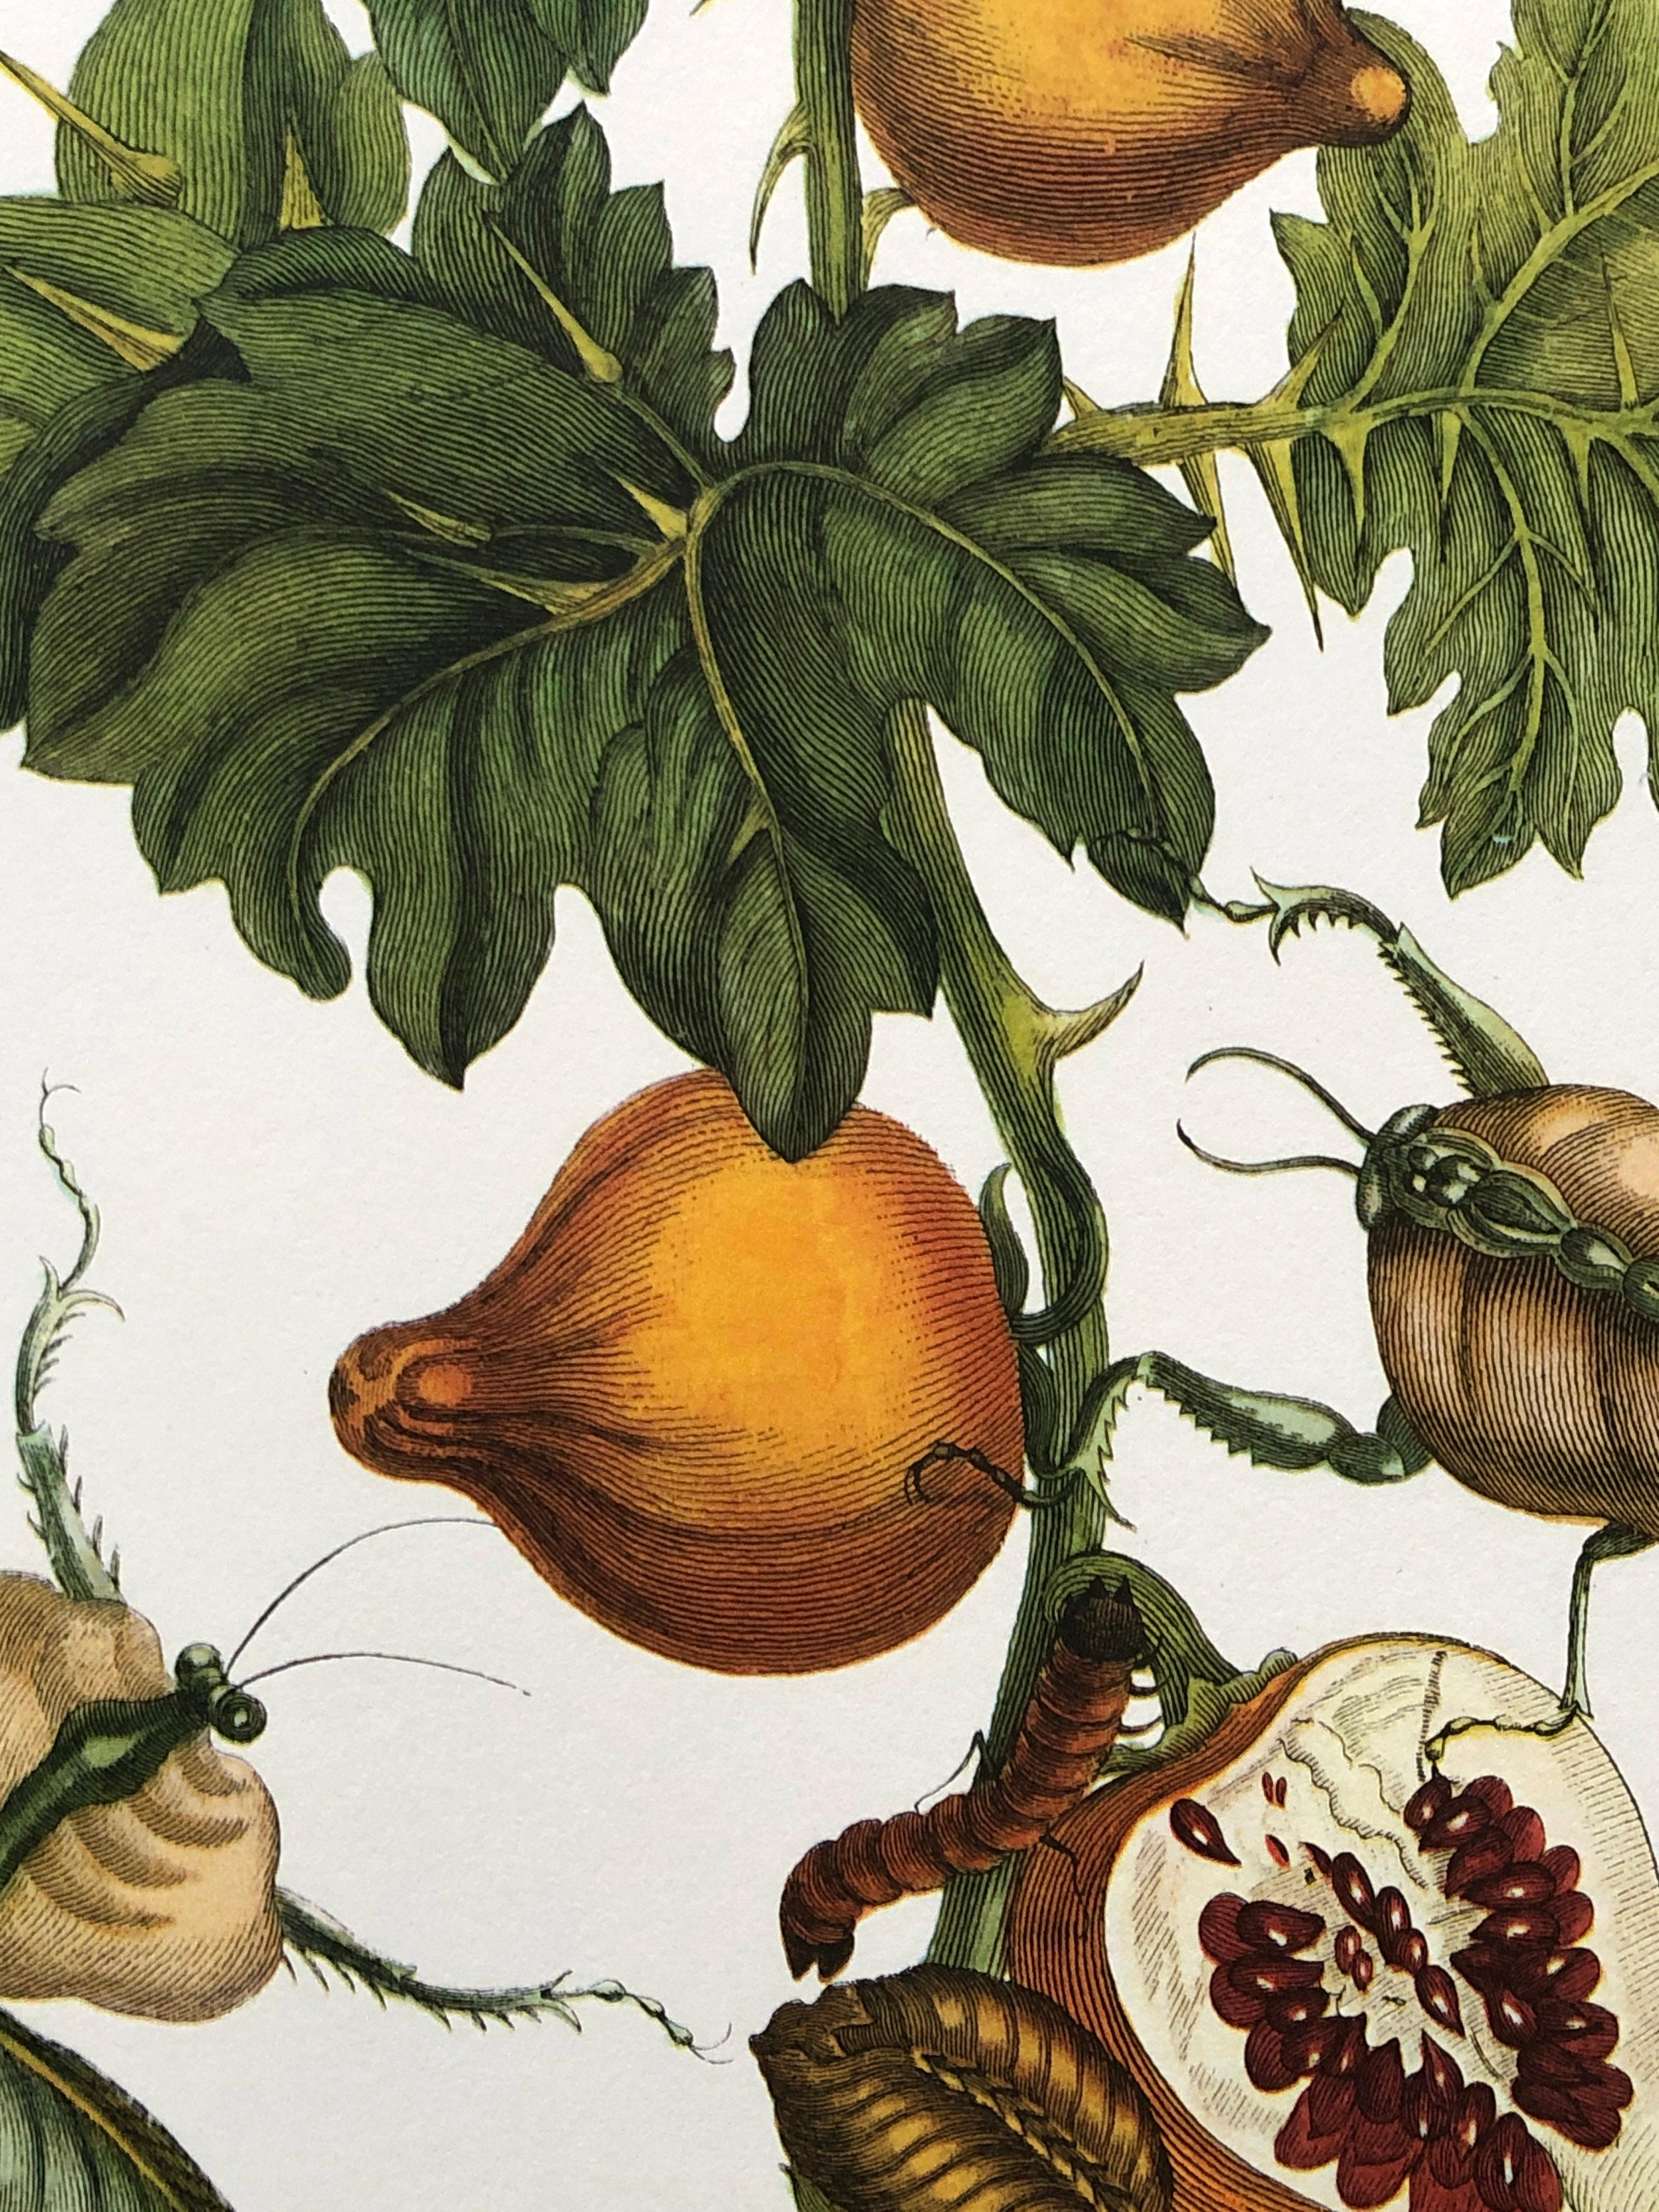 Maria Sibylla Merian - P. Sluyter - Bat apple and praying mantis Nr. 27 In Good Condition For Sale In EINDHOVEN, NL